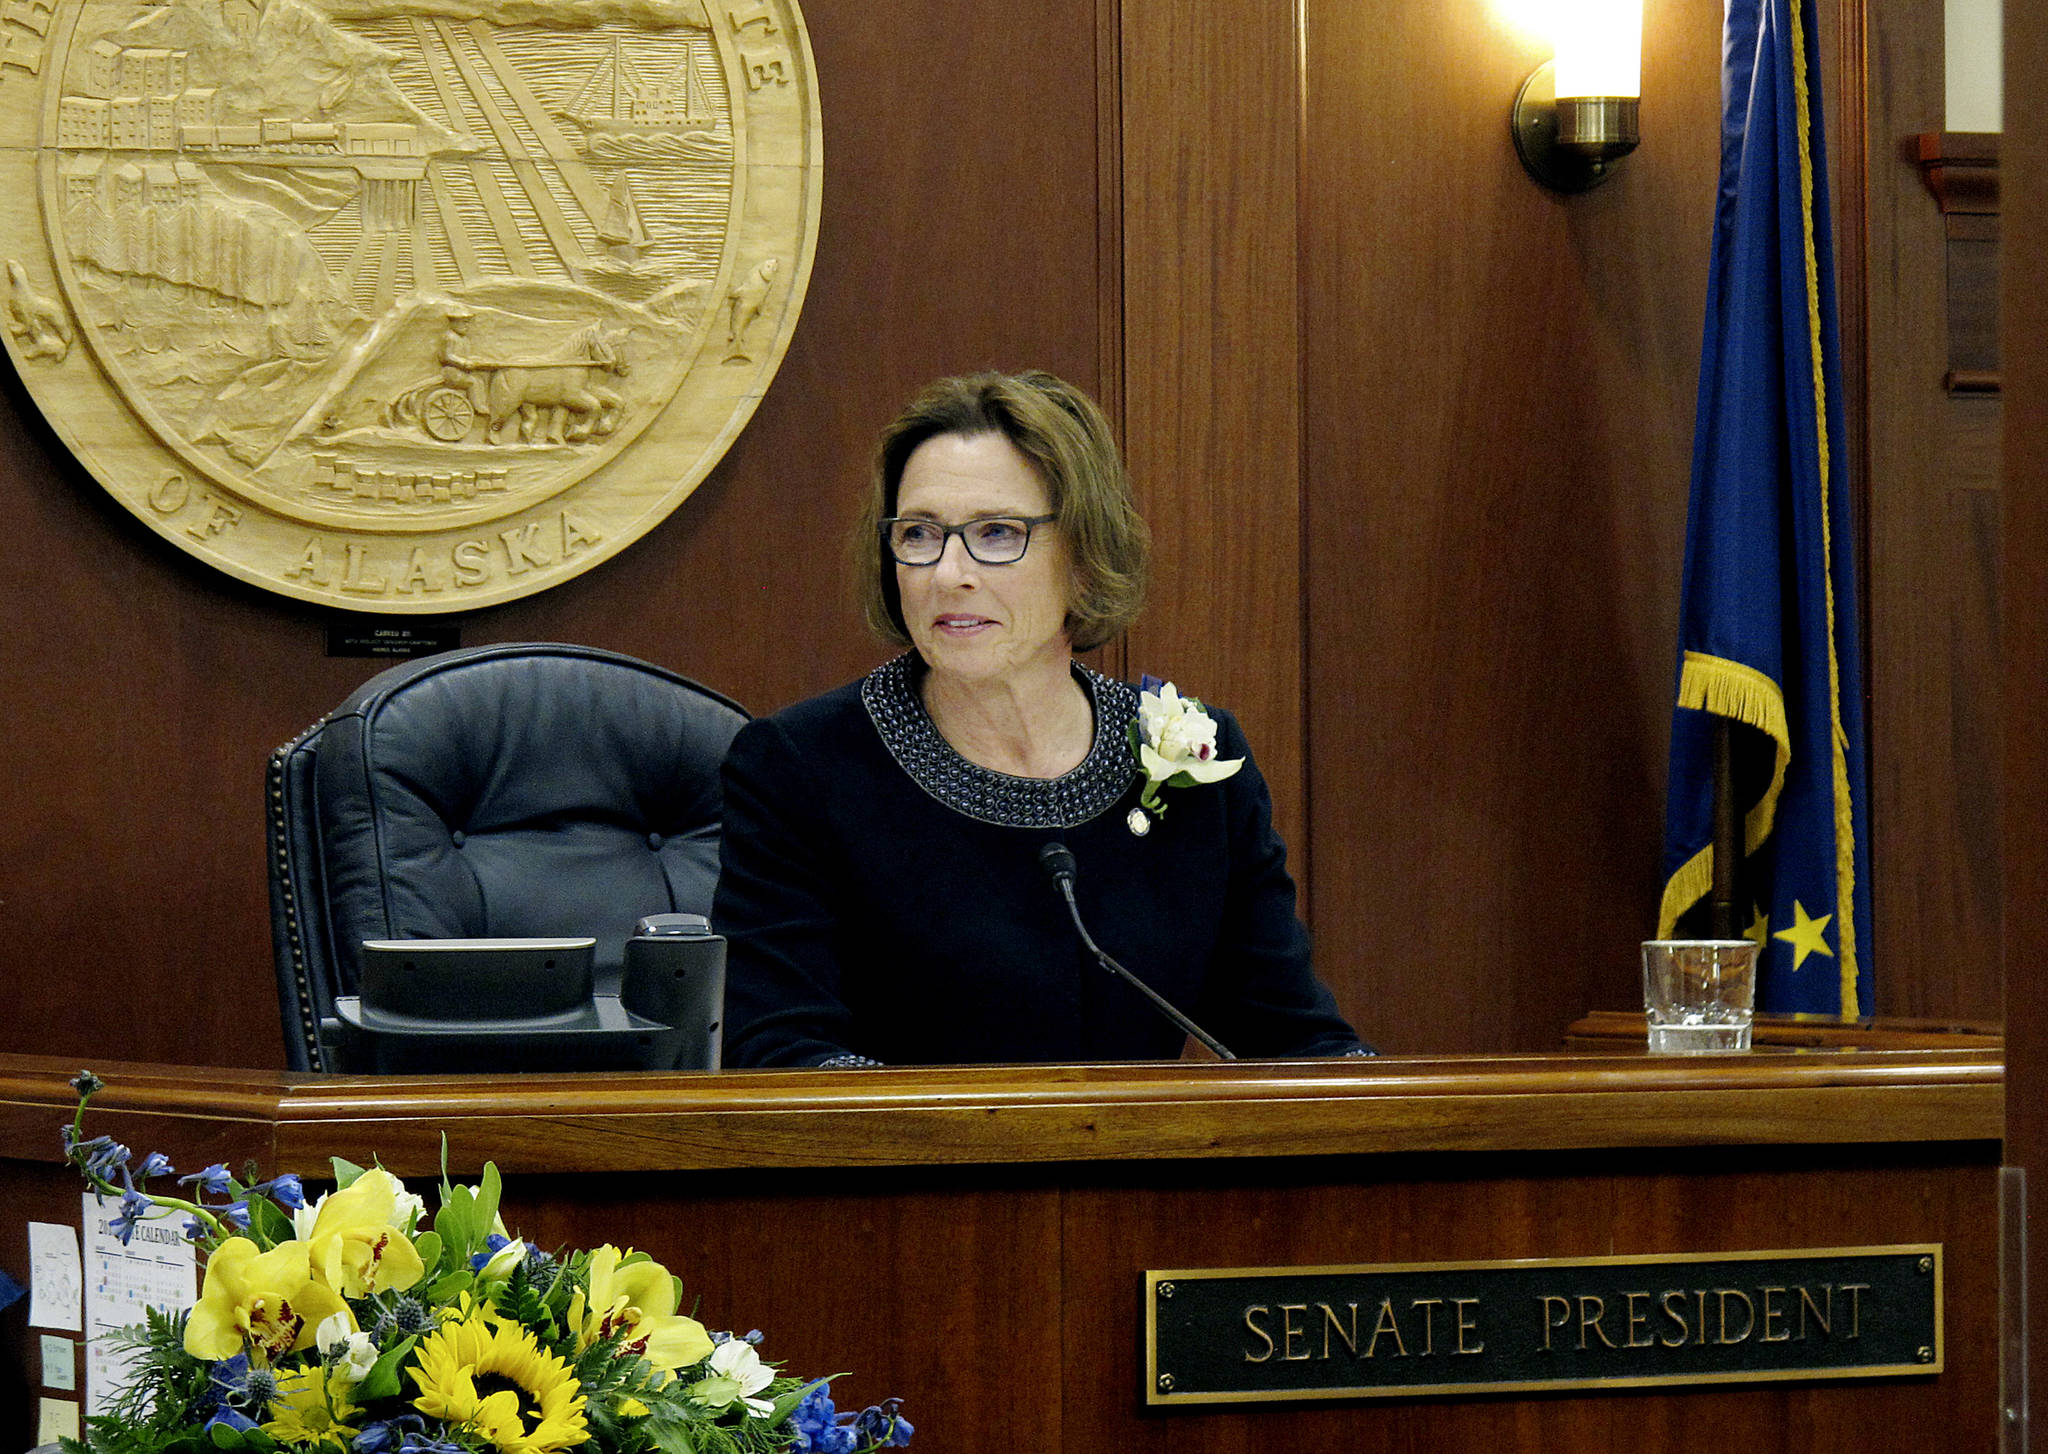 In this Jan. 15, 2019, file photo, Anchorage Republican state Sen. Cathy Giessel is shown after being elected Alaska Senate president in Juneau, Alaska. During her first year as Alaska Senate president, Giessel won over one-time political adversaries and angered some within her own party for her willingness to buck Gov. Mike Dunleavy, a fellow Republican, on key pieces of his agenda. (AP Photo | Becky Bohrer File)